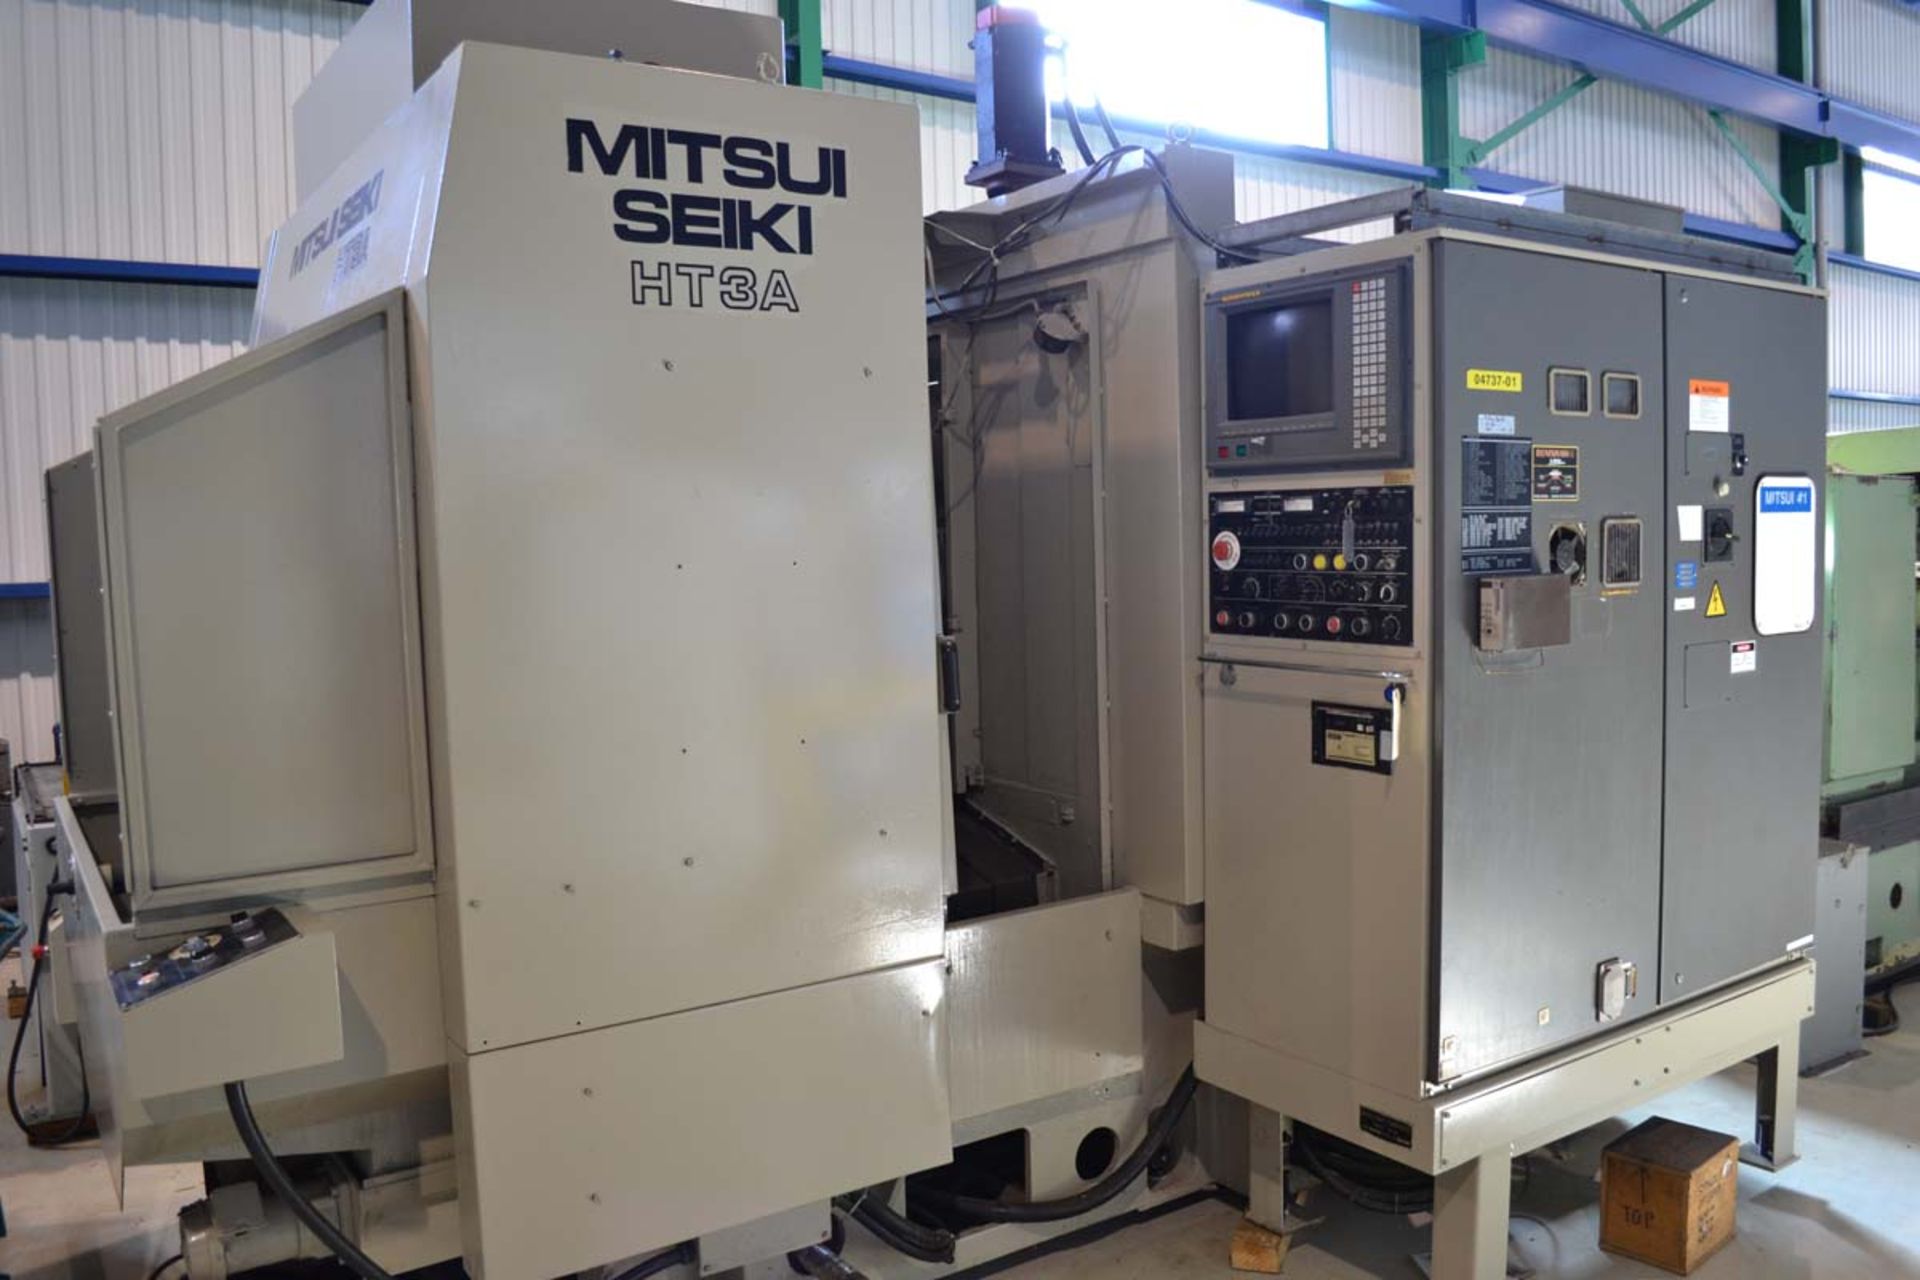 MITSUI SEIKI CNC HORIZONTAL MACHINING CENTER MOD. HT3A, PALLET SIZE (2): 15.7 IN. X 15.7 IN.